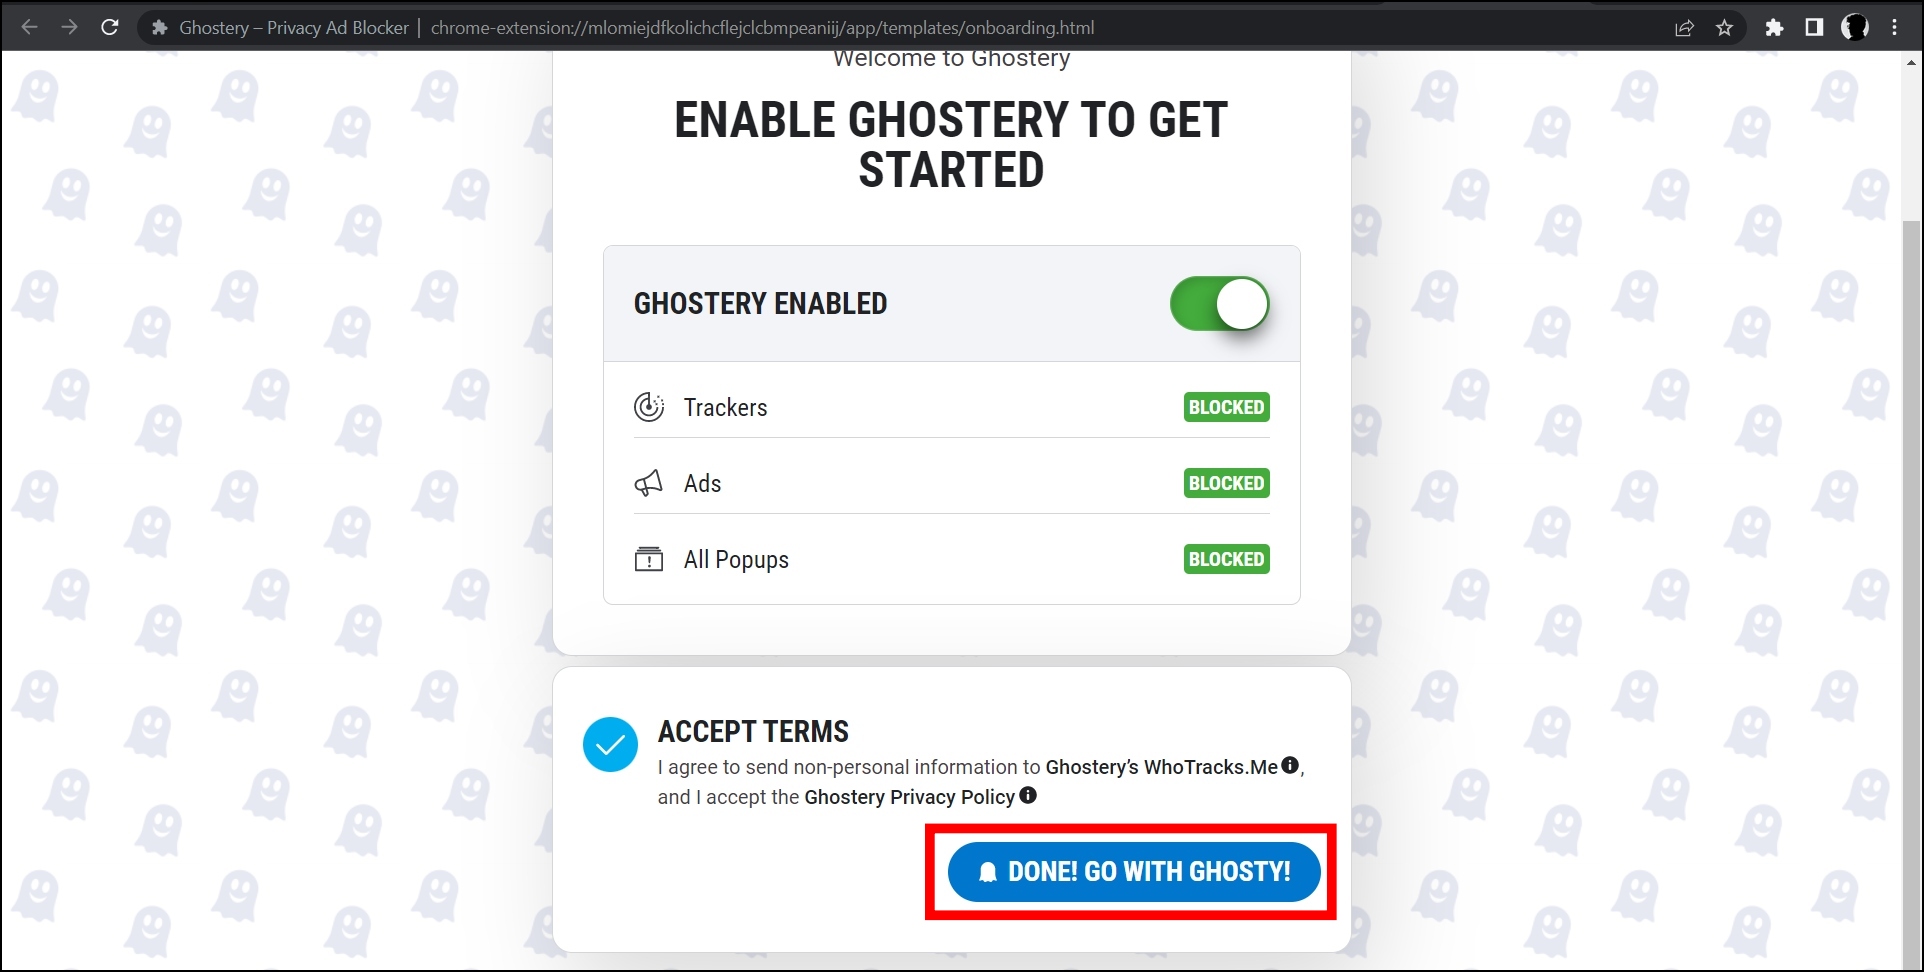 "Ghostery: